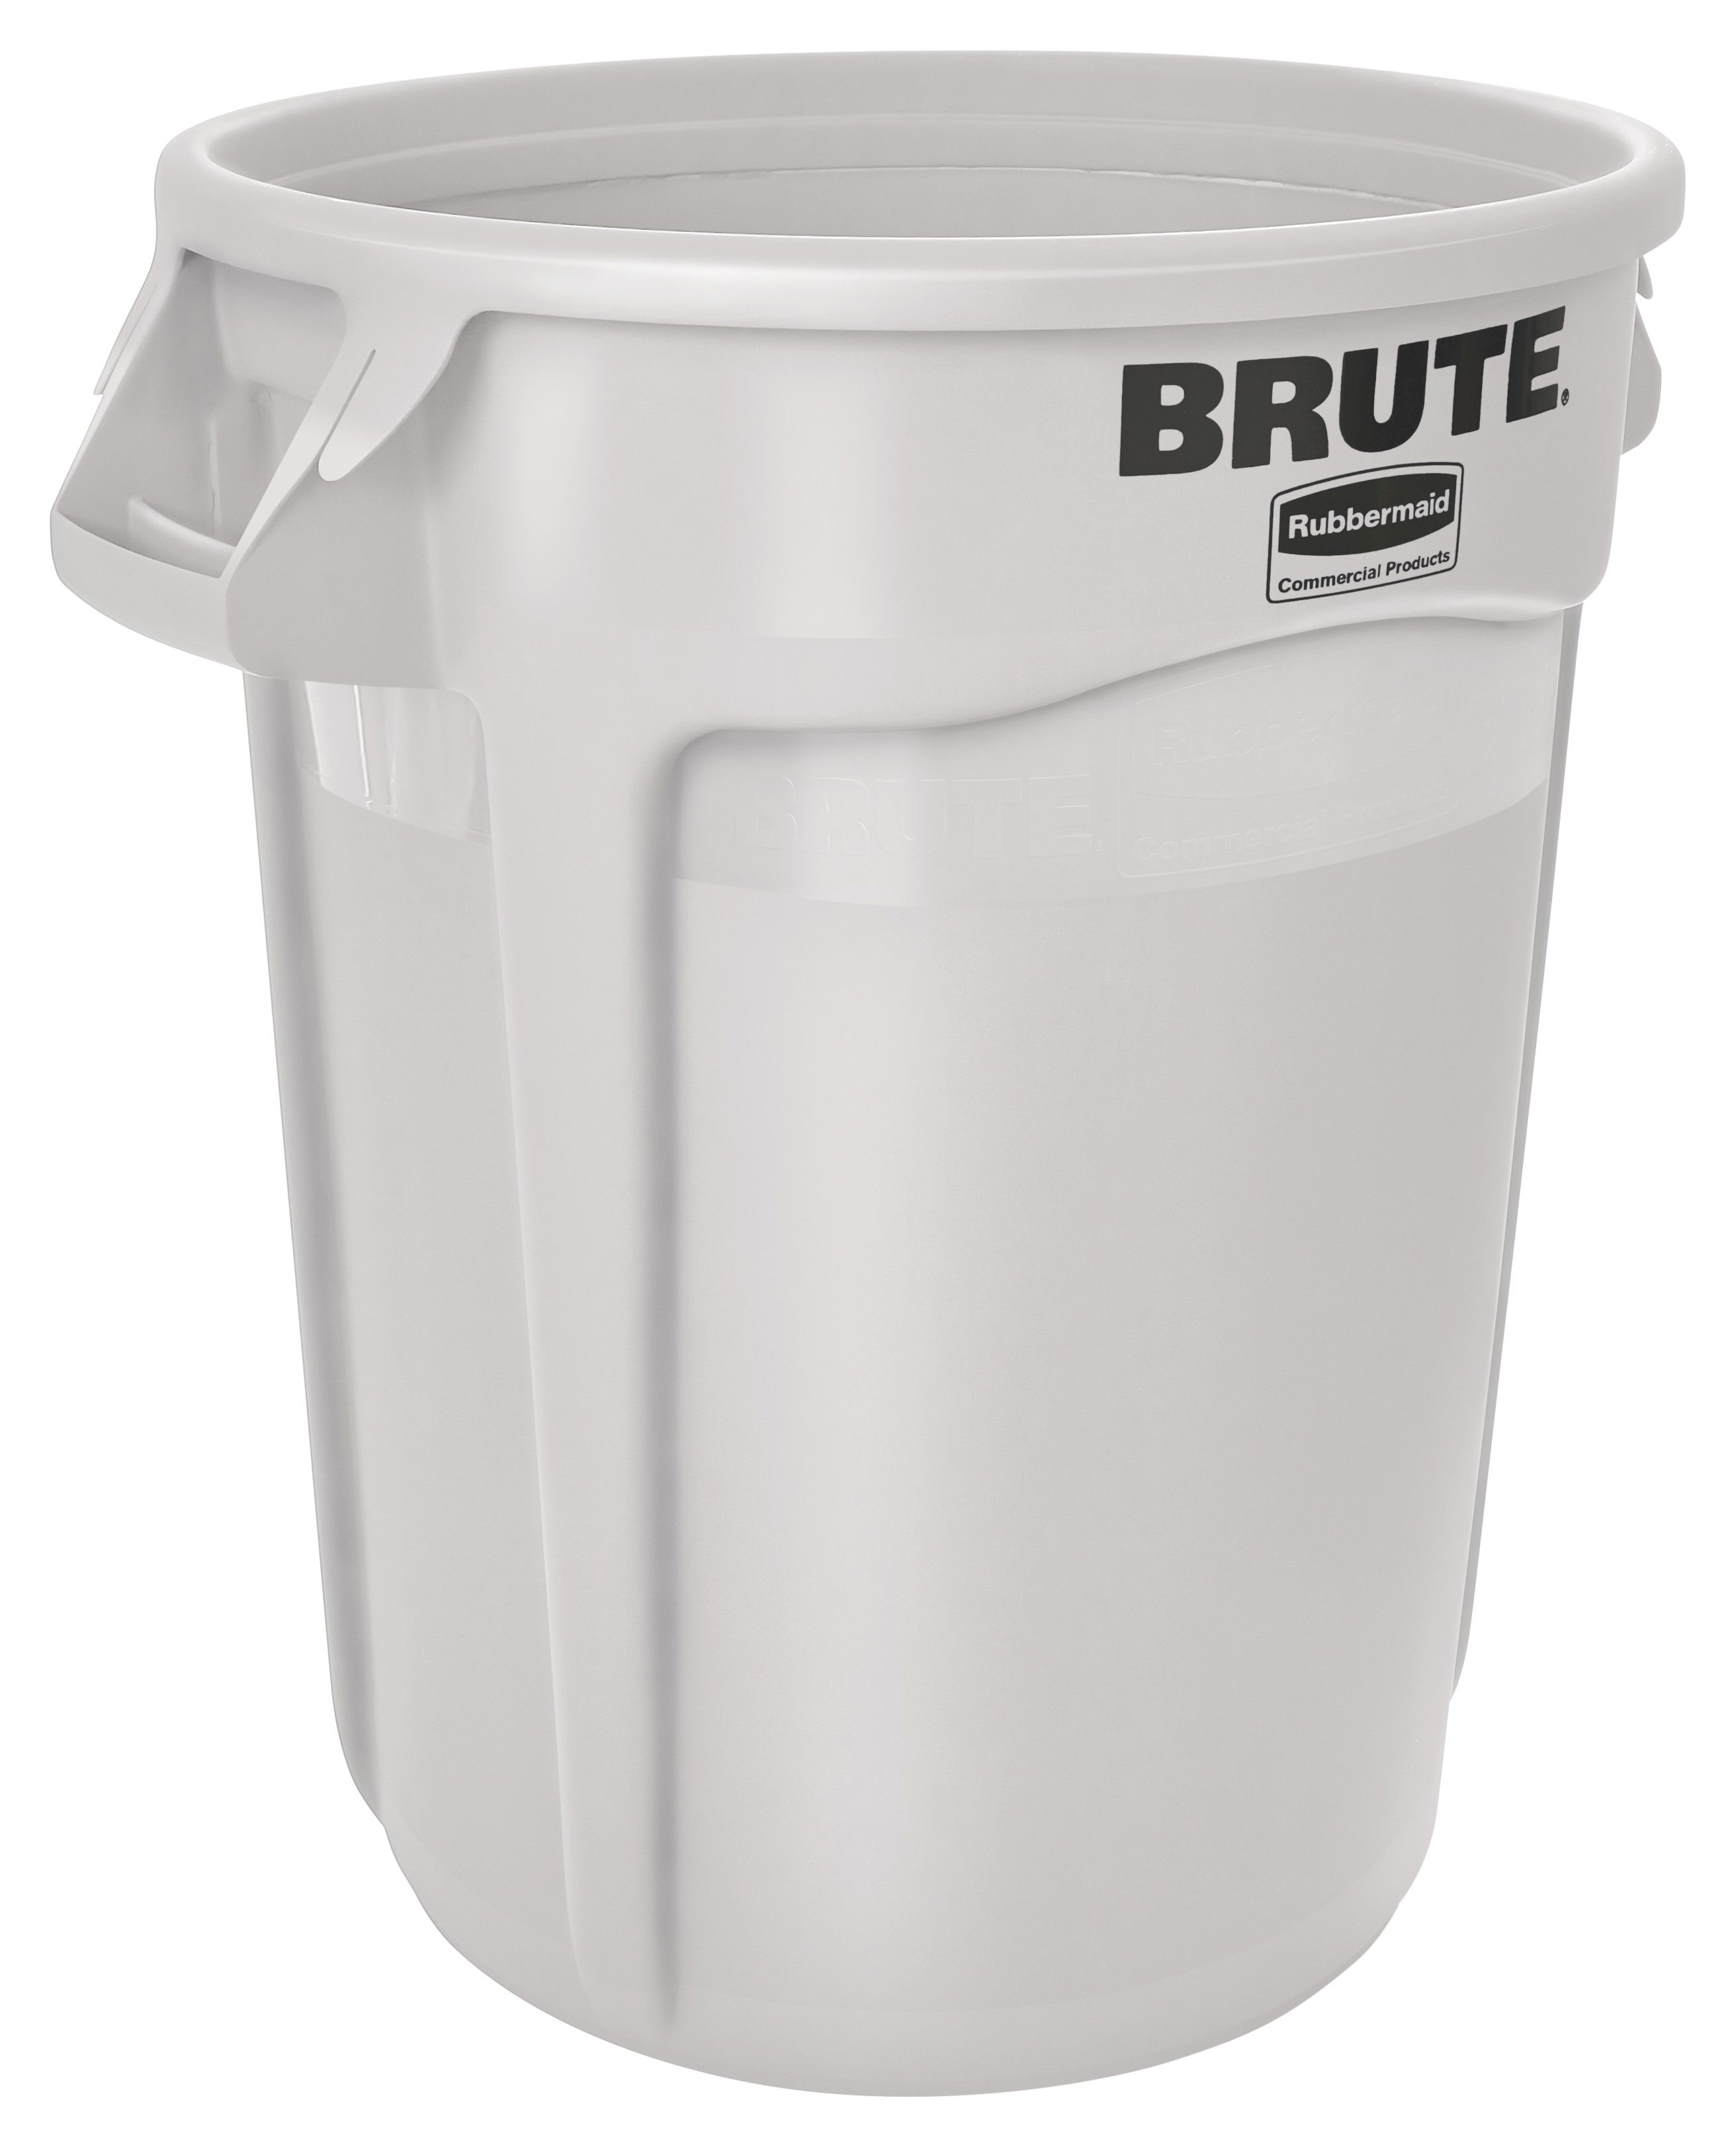 Rubbermaid Ronde Brute container 121,1 ltr, Rubbermaid, model: VB 002632, wit